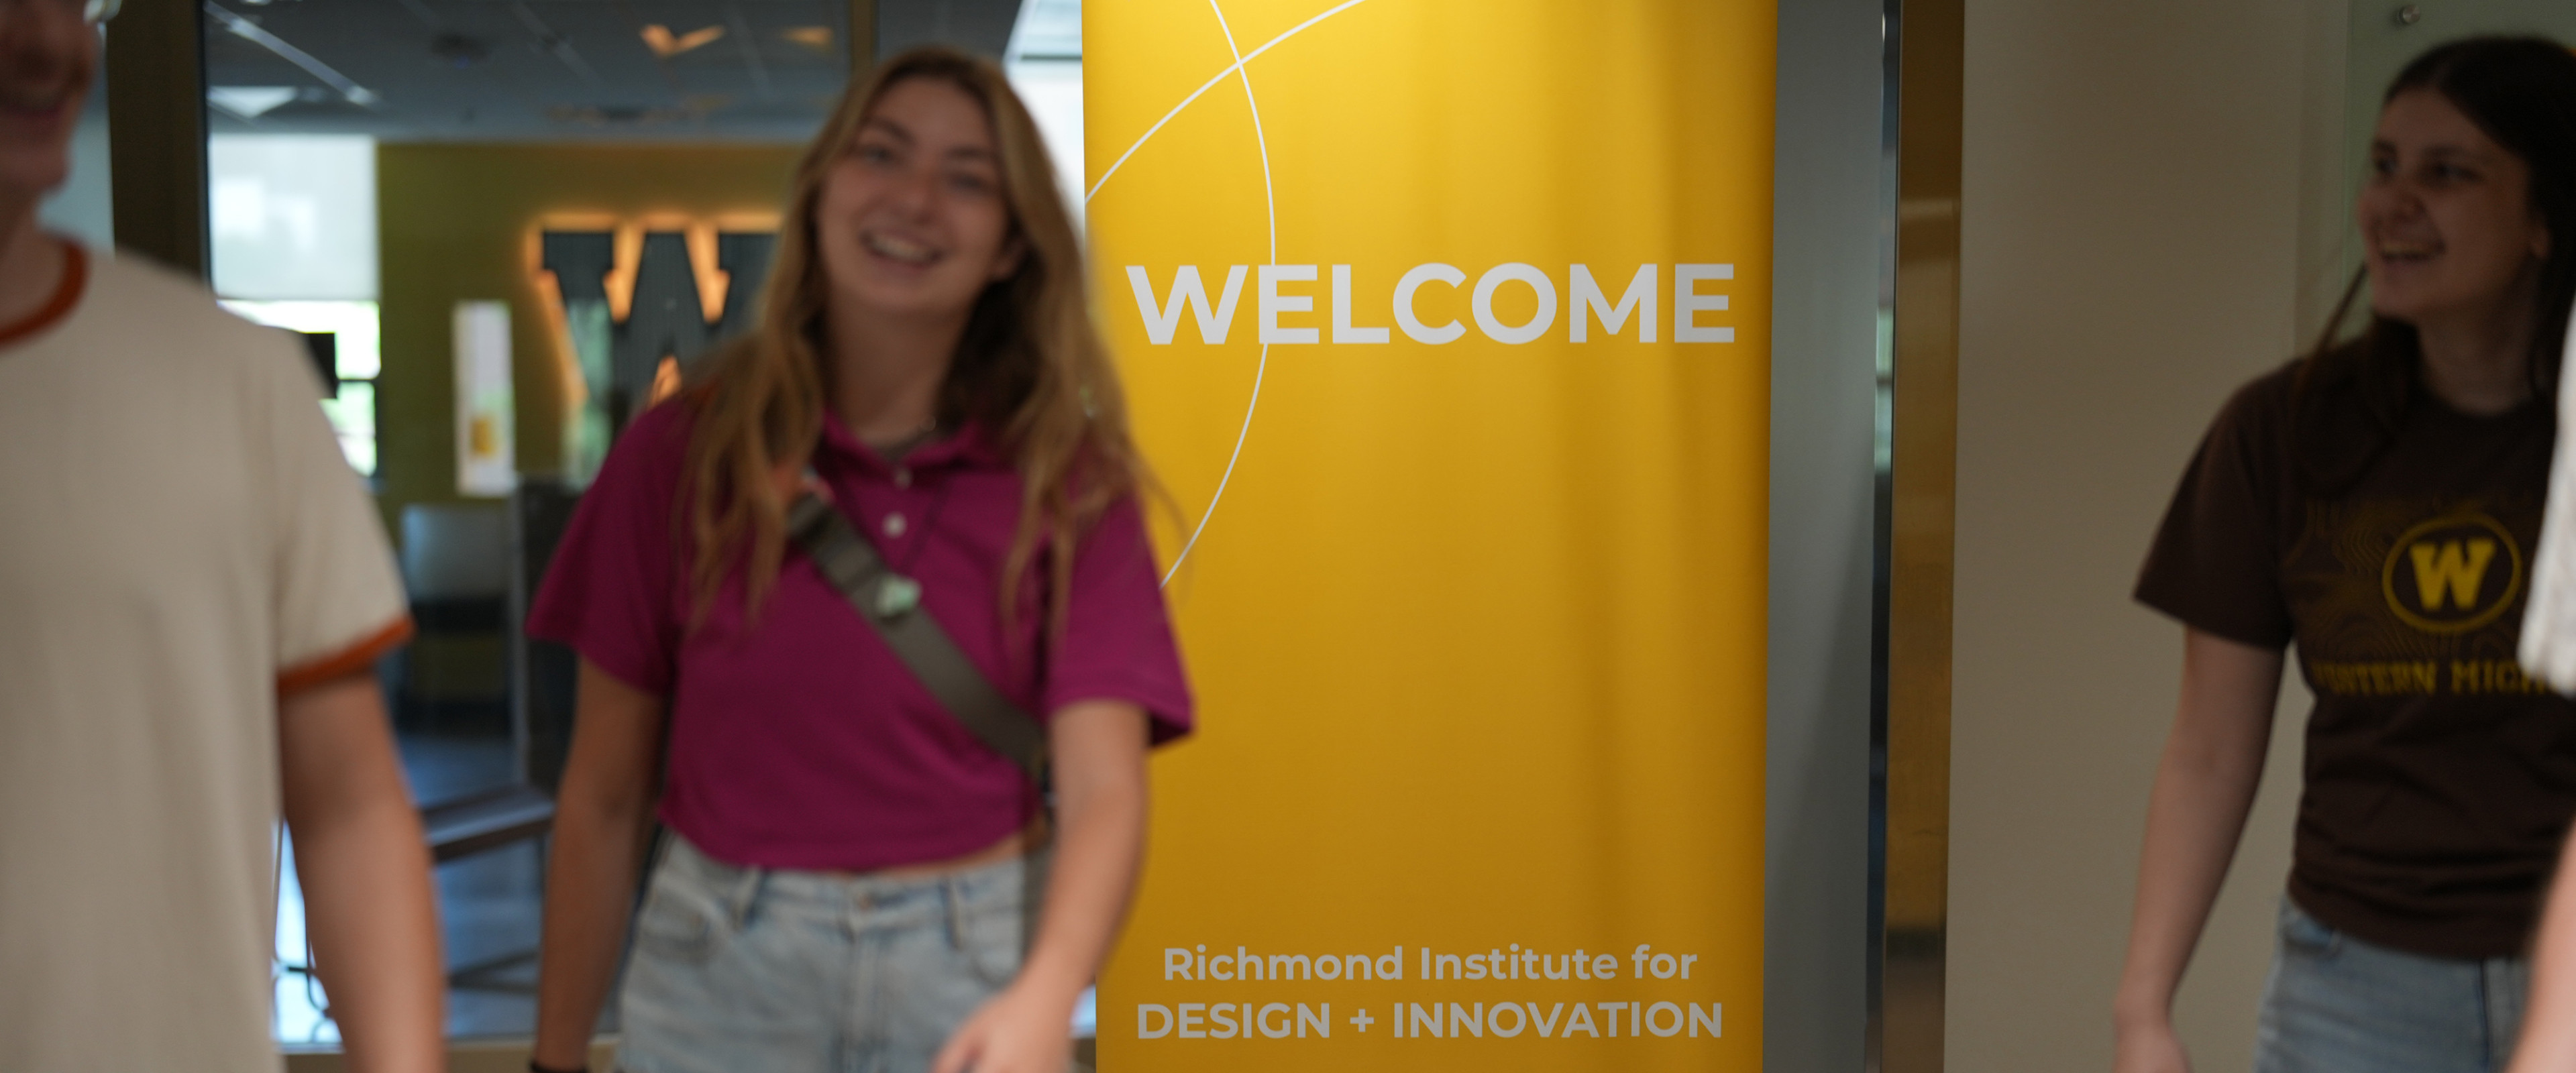 Students walking in front of a Welcome sign in the Richmond Institute for Design + Innovation.